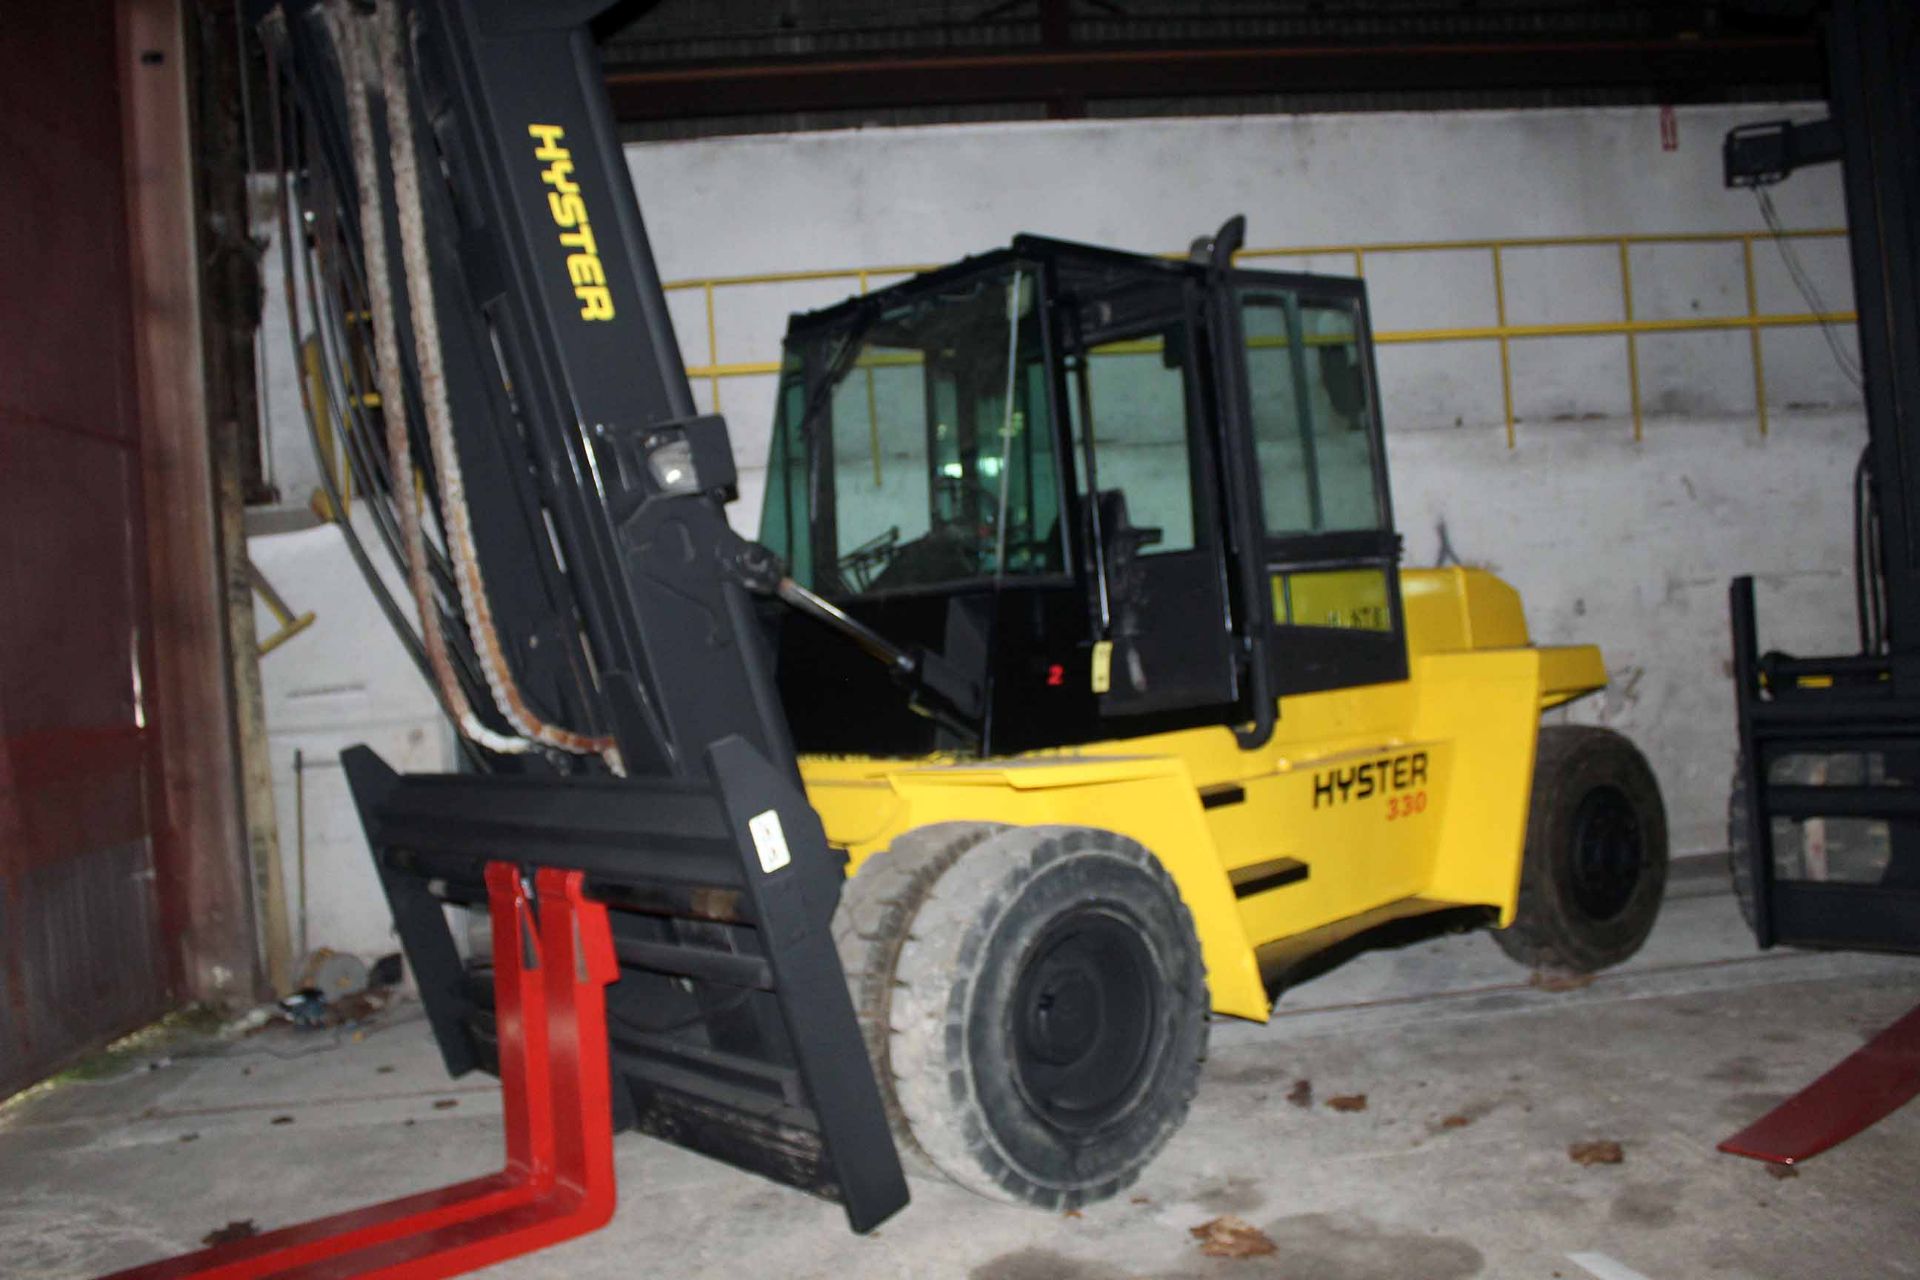 FORKLIFT, HYSTER 33,000 LB. BASE CAP. MDL. H330XL2, 29,300 lb. cap. as equipped, 2-stage mast, 8’